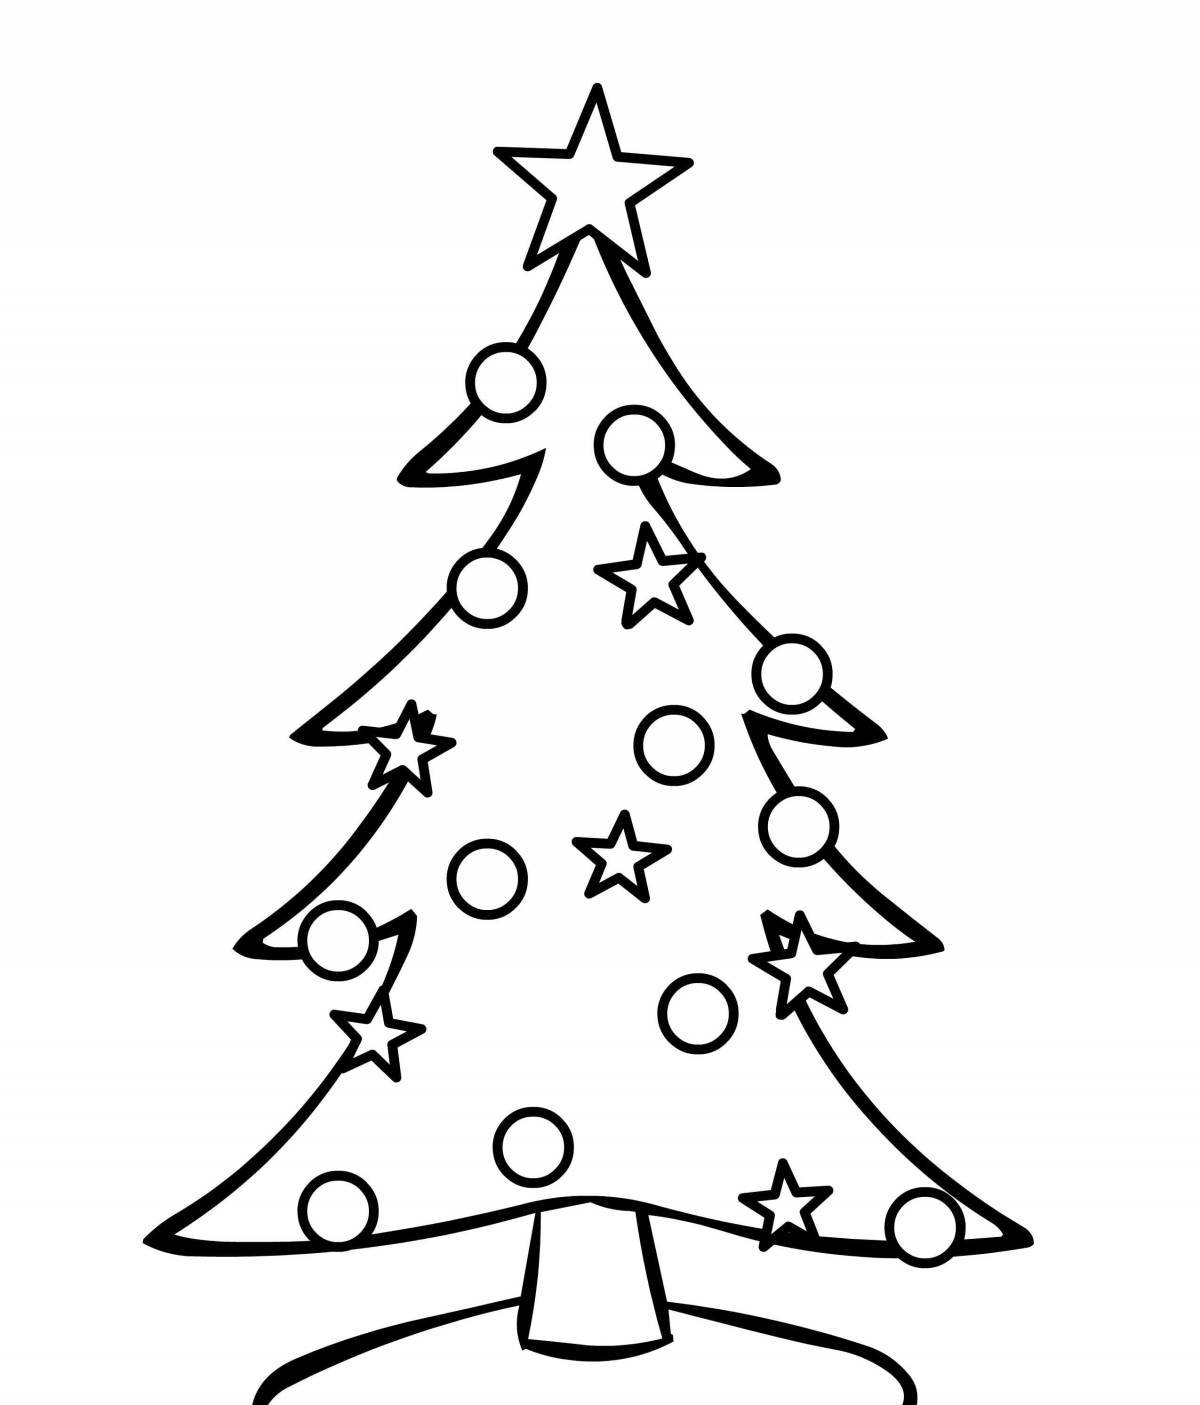 Fascinating Christmas tree coloring book for 3-4 year olds